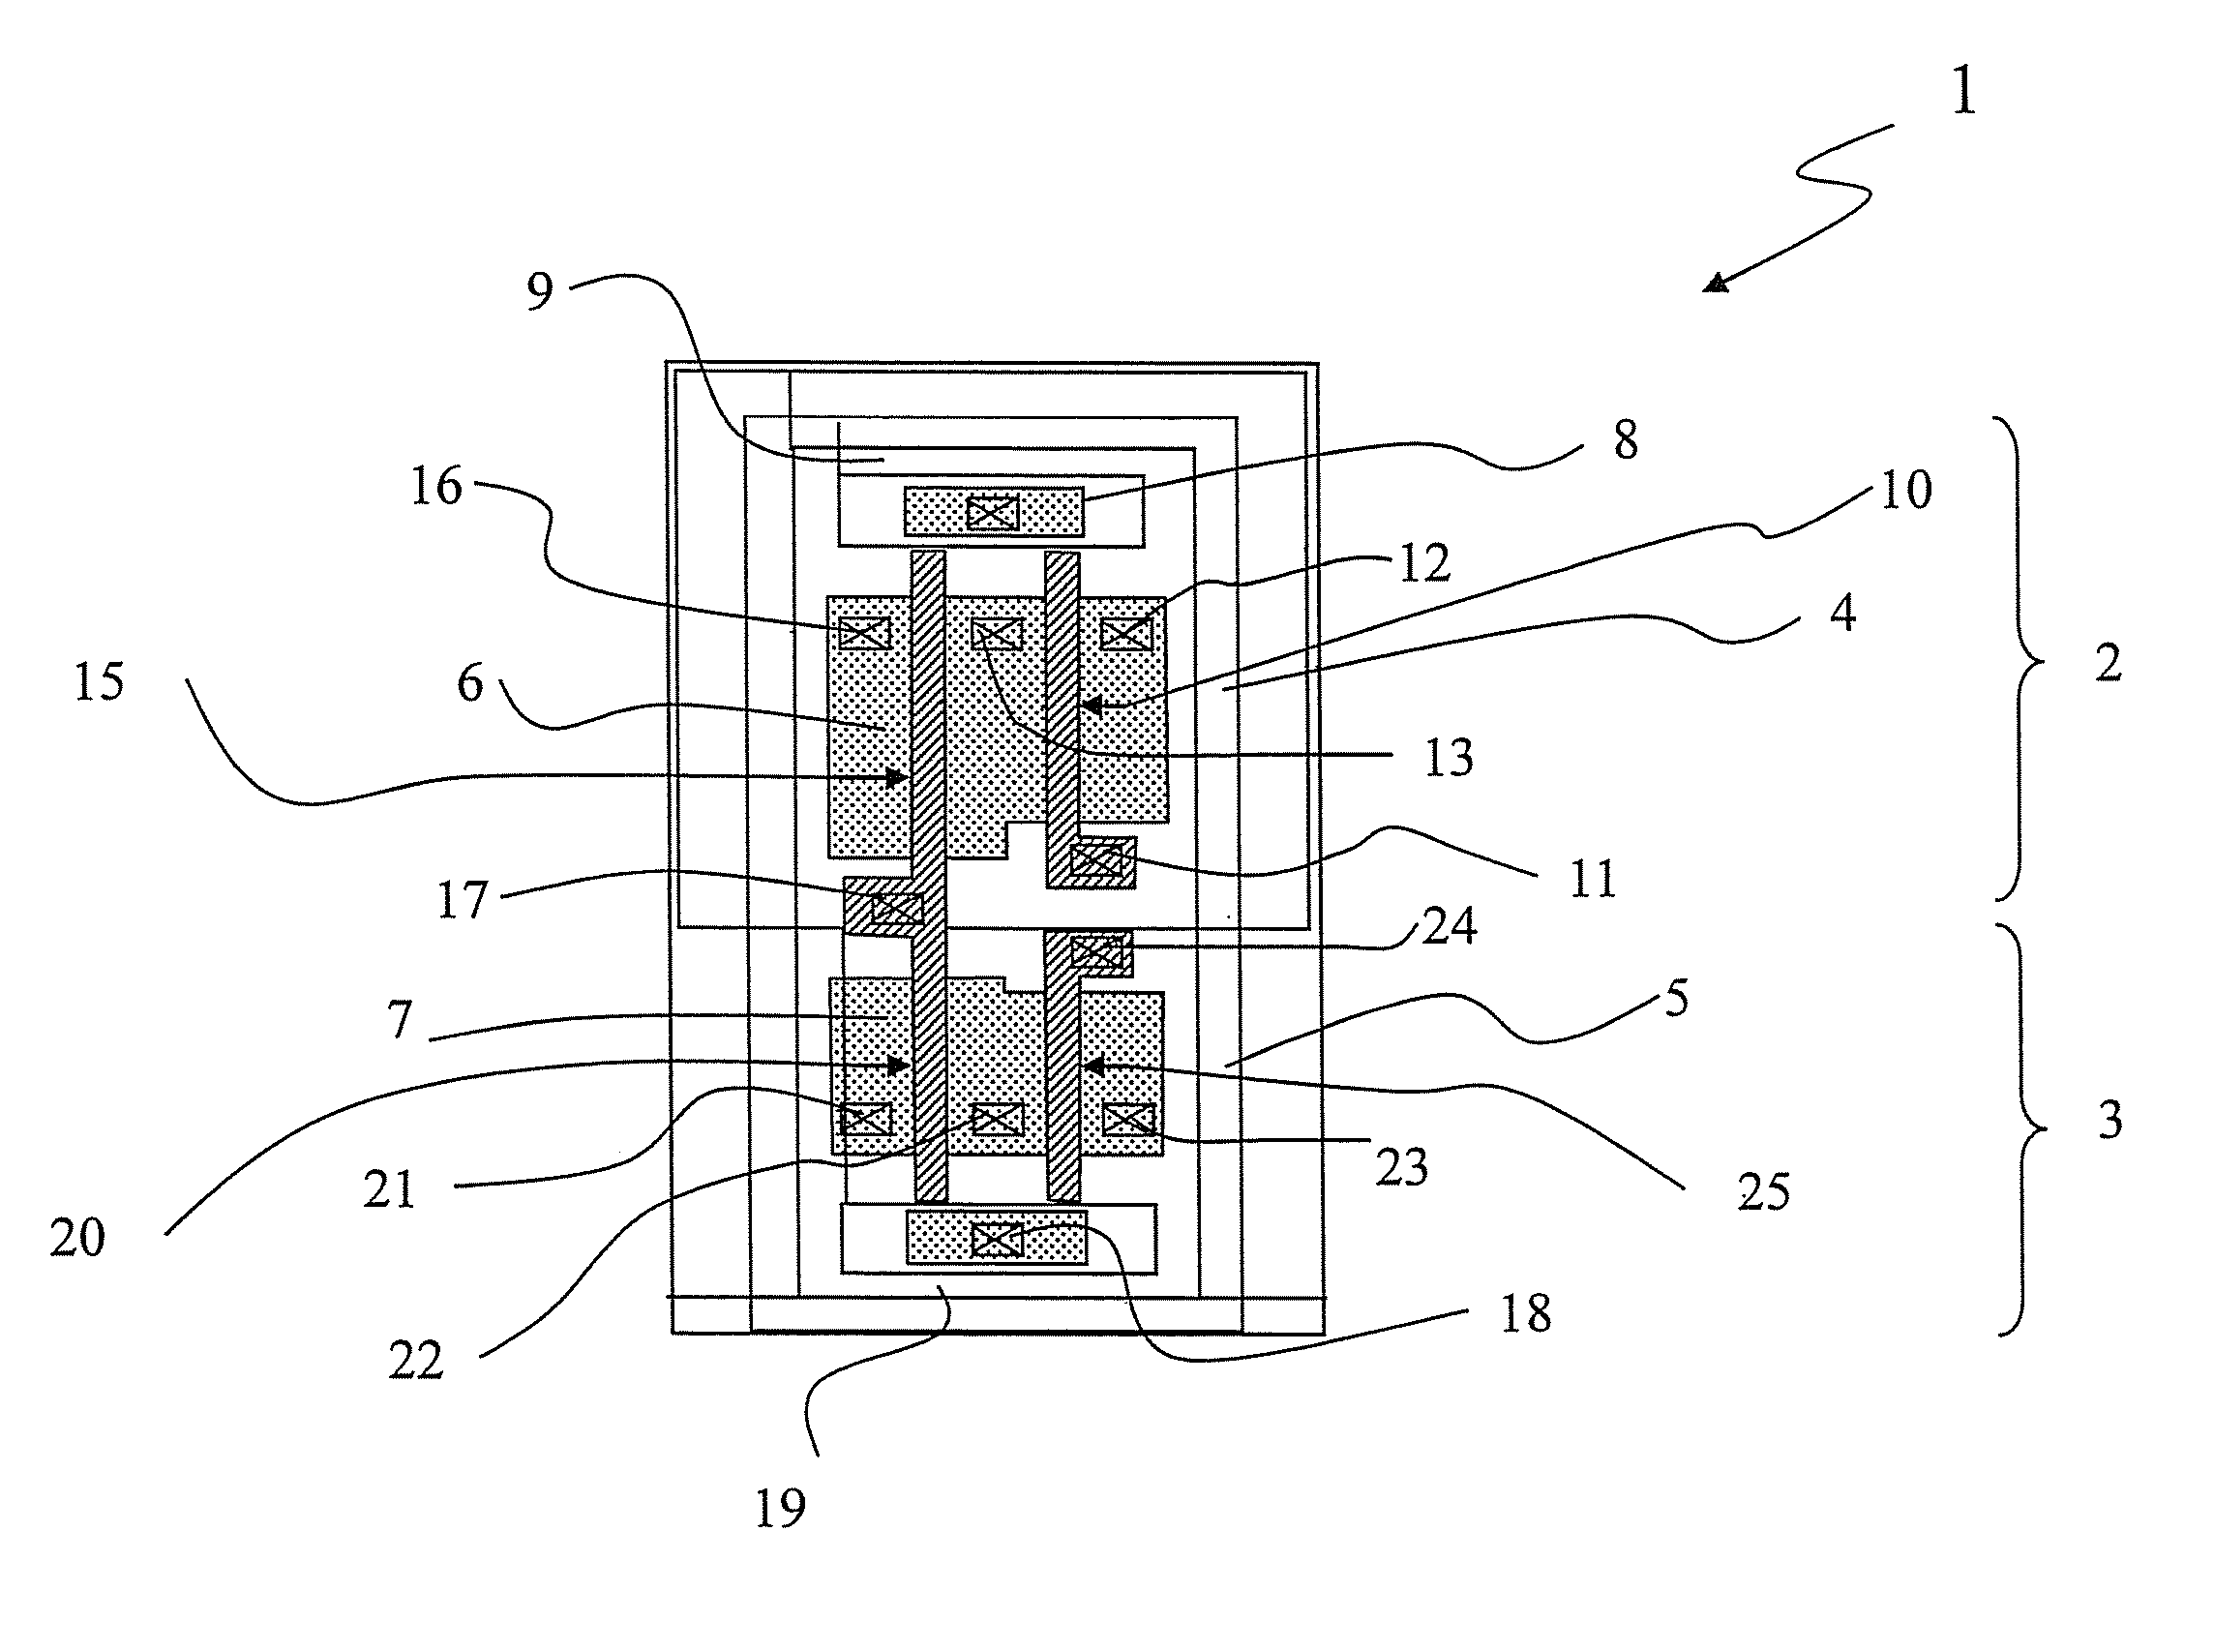 Method for implementing functional changes into a design layout of an integrated device, in particular a system-on-chip, by means of mask programmable filling cells